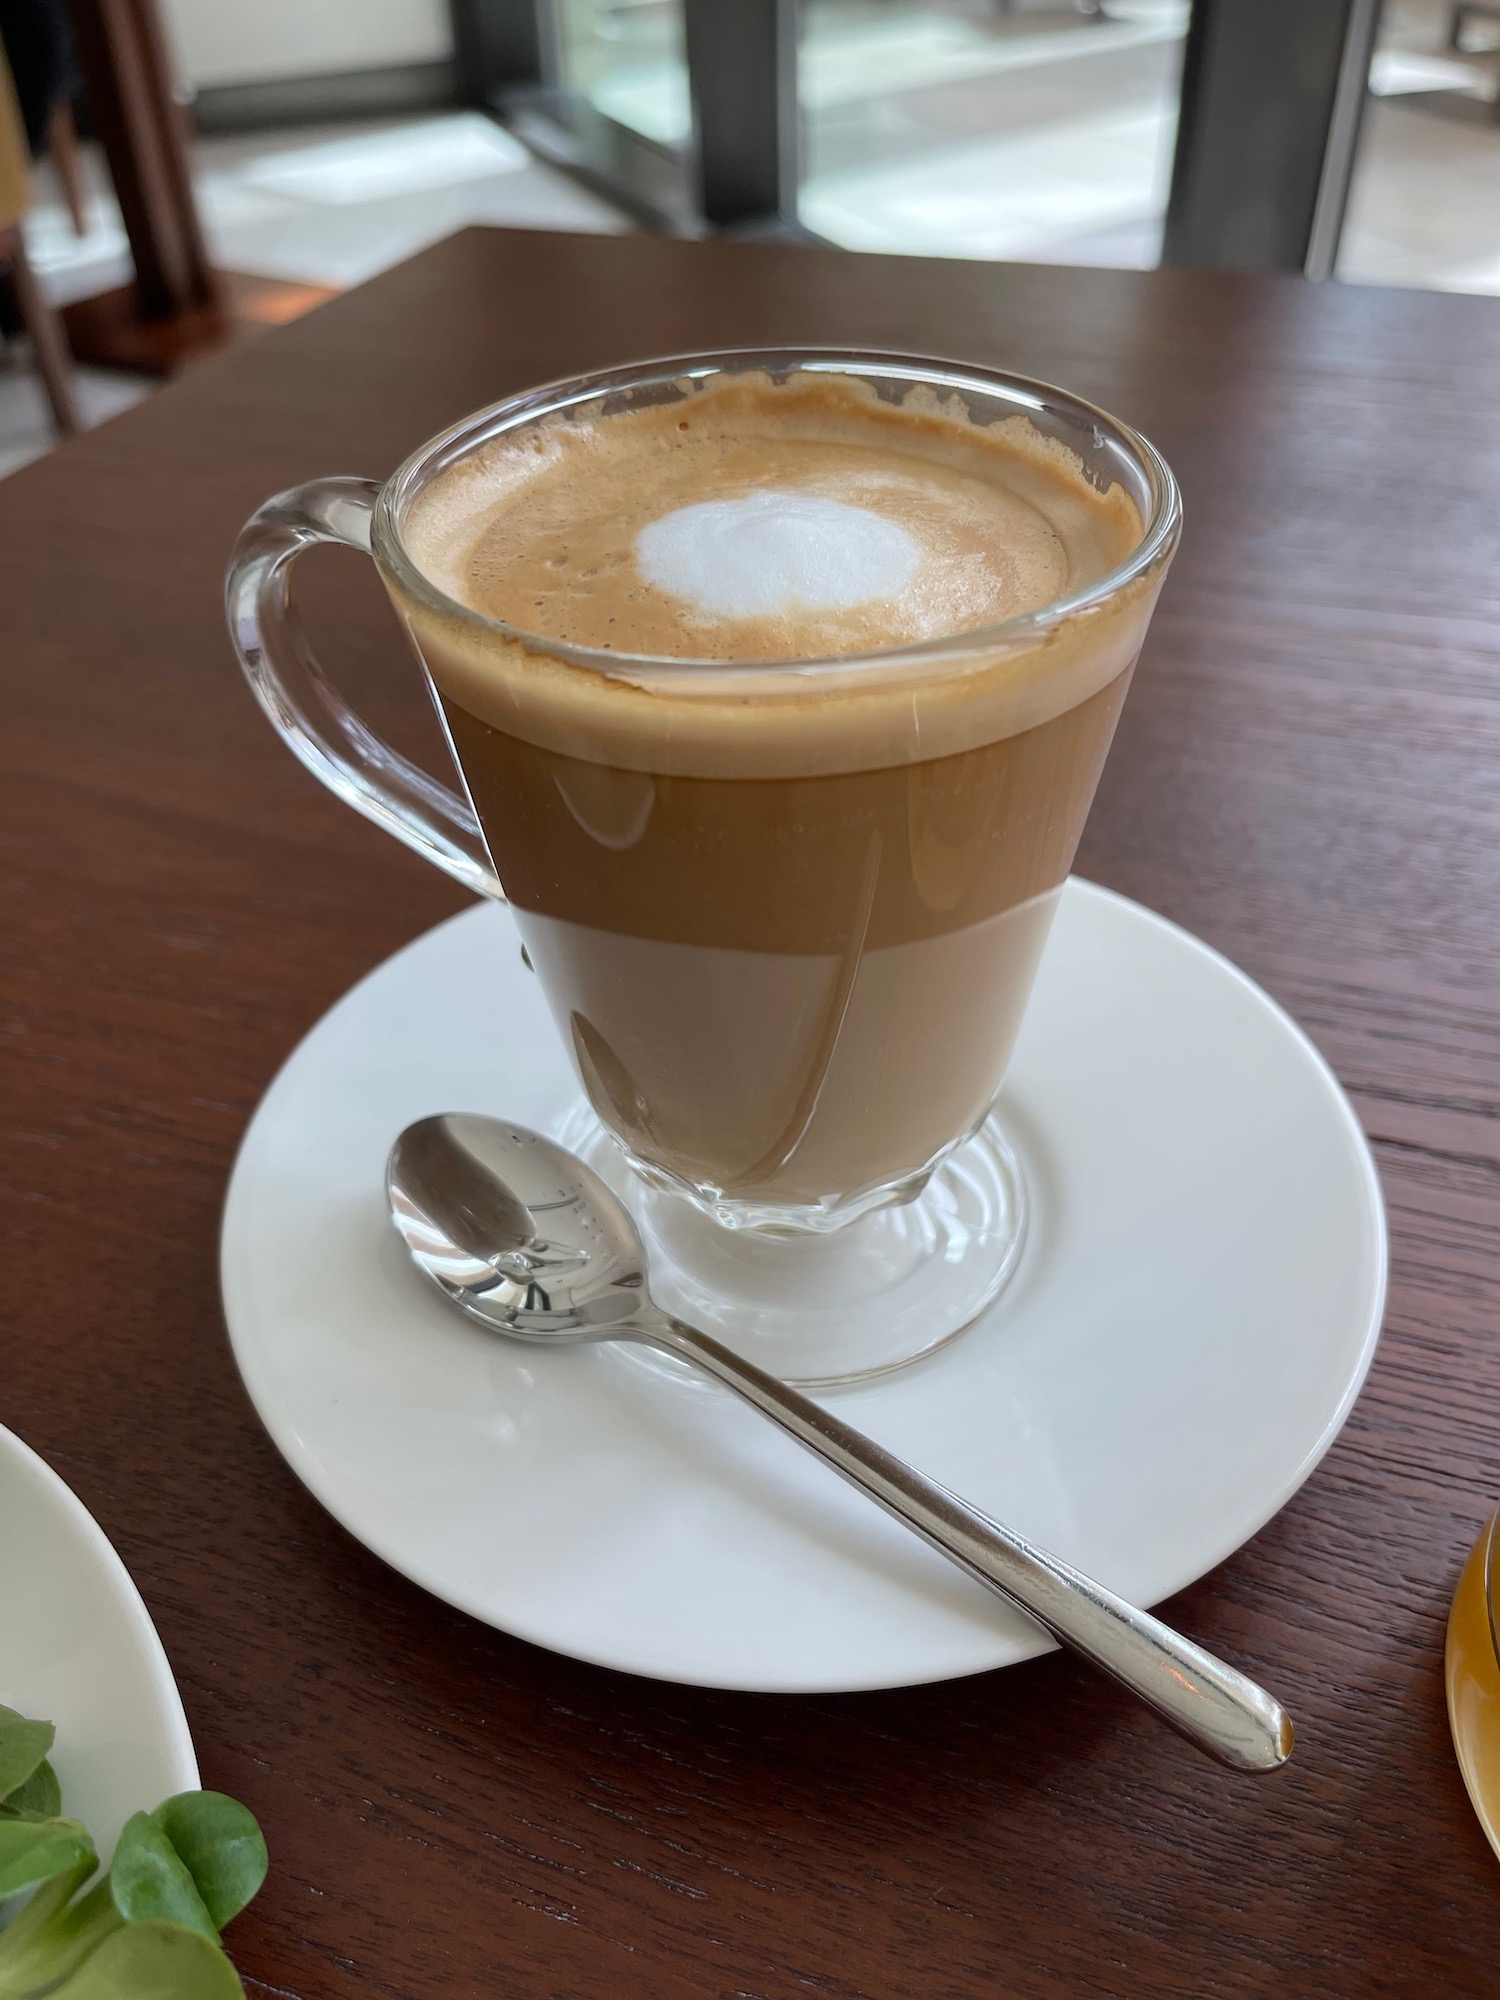 a glass cup of coffee on a plate with a spoon